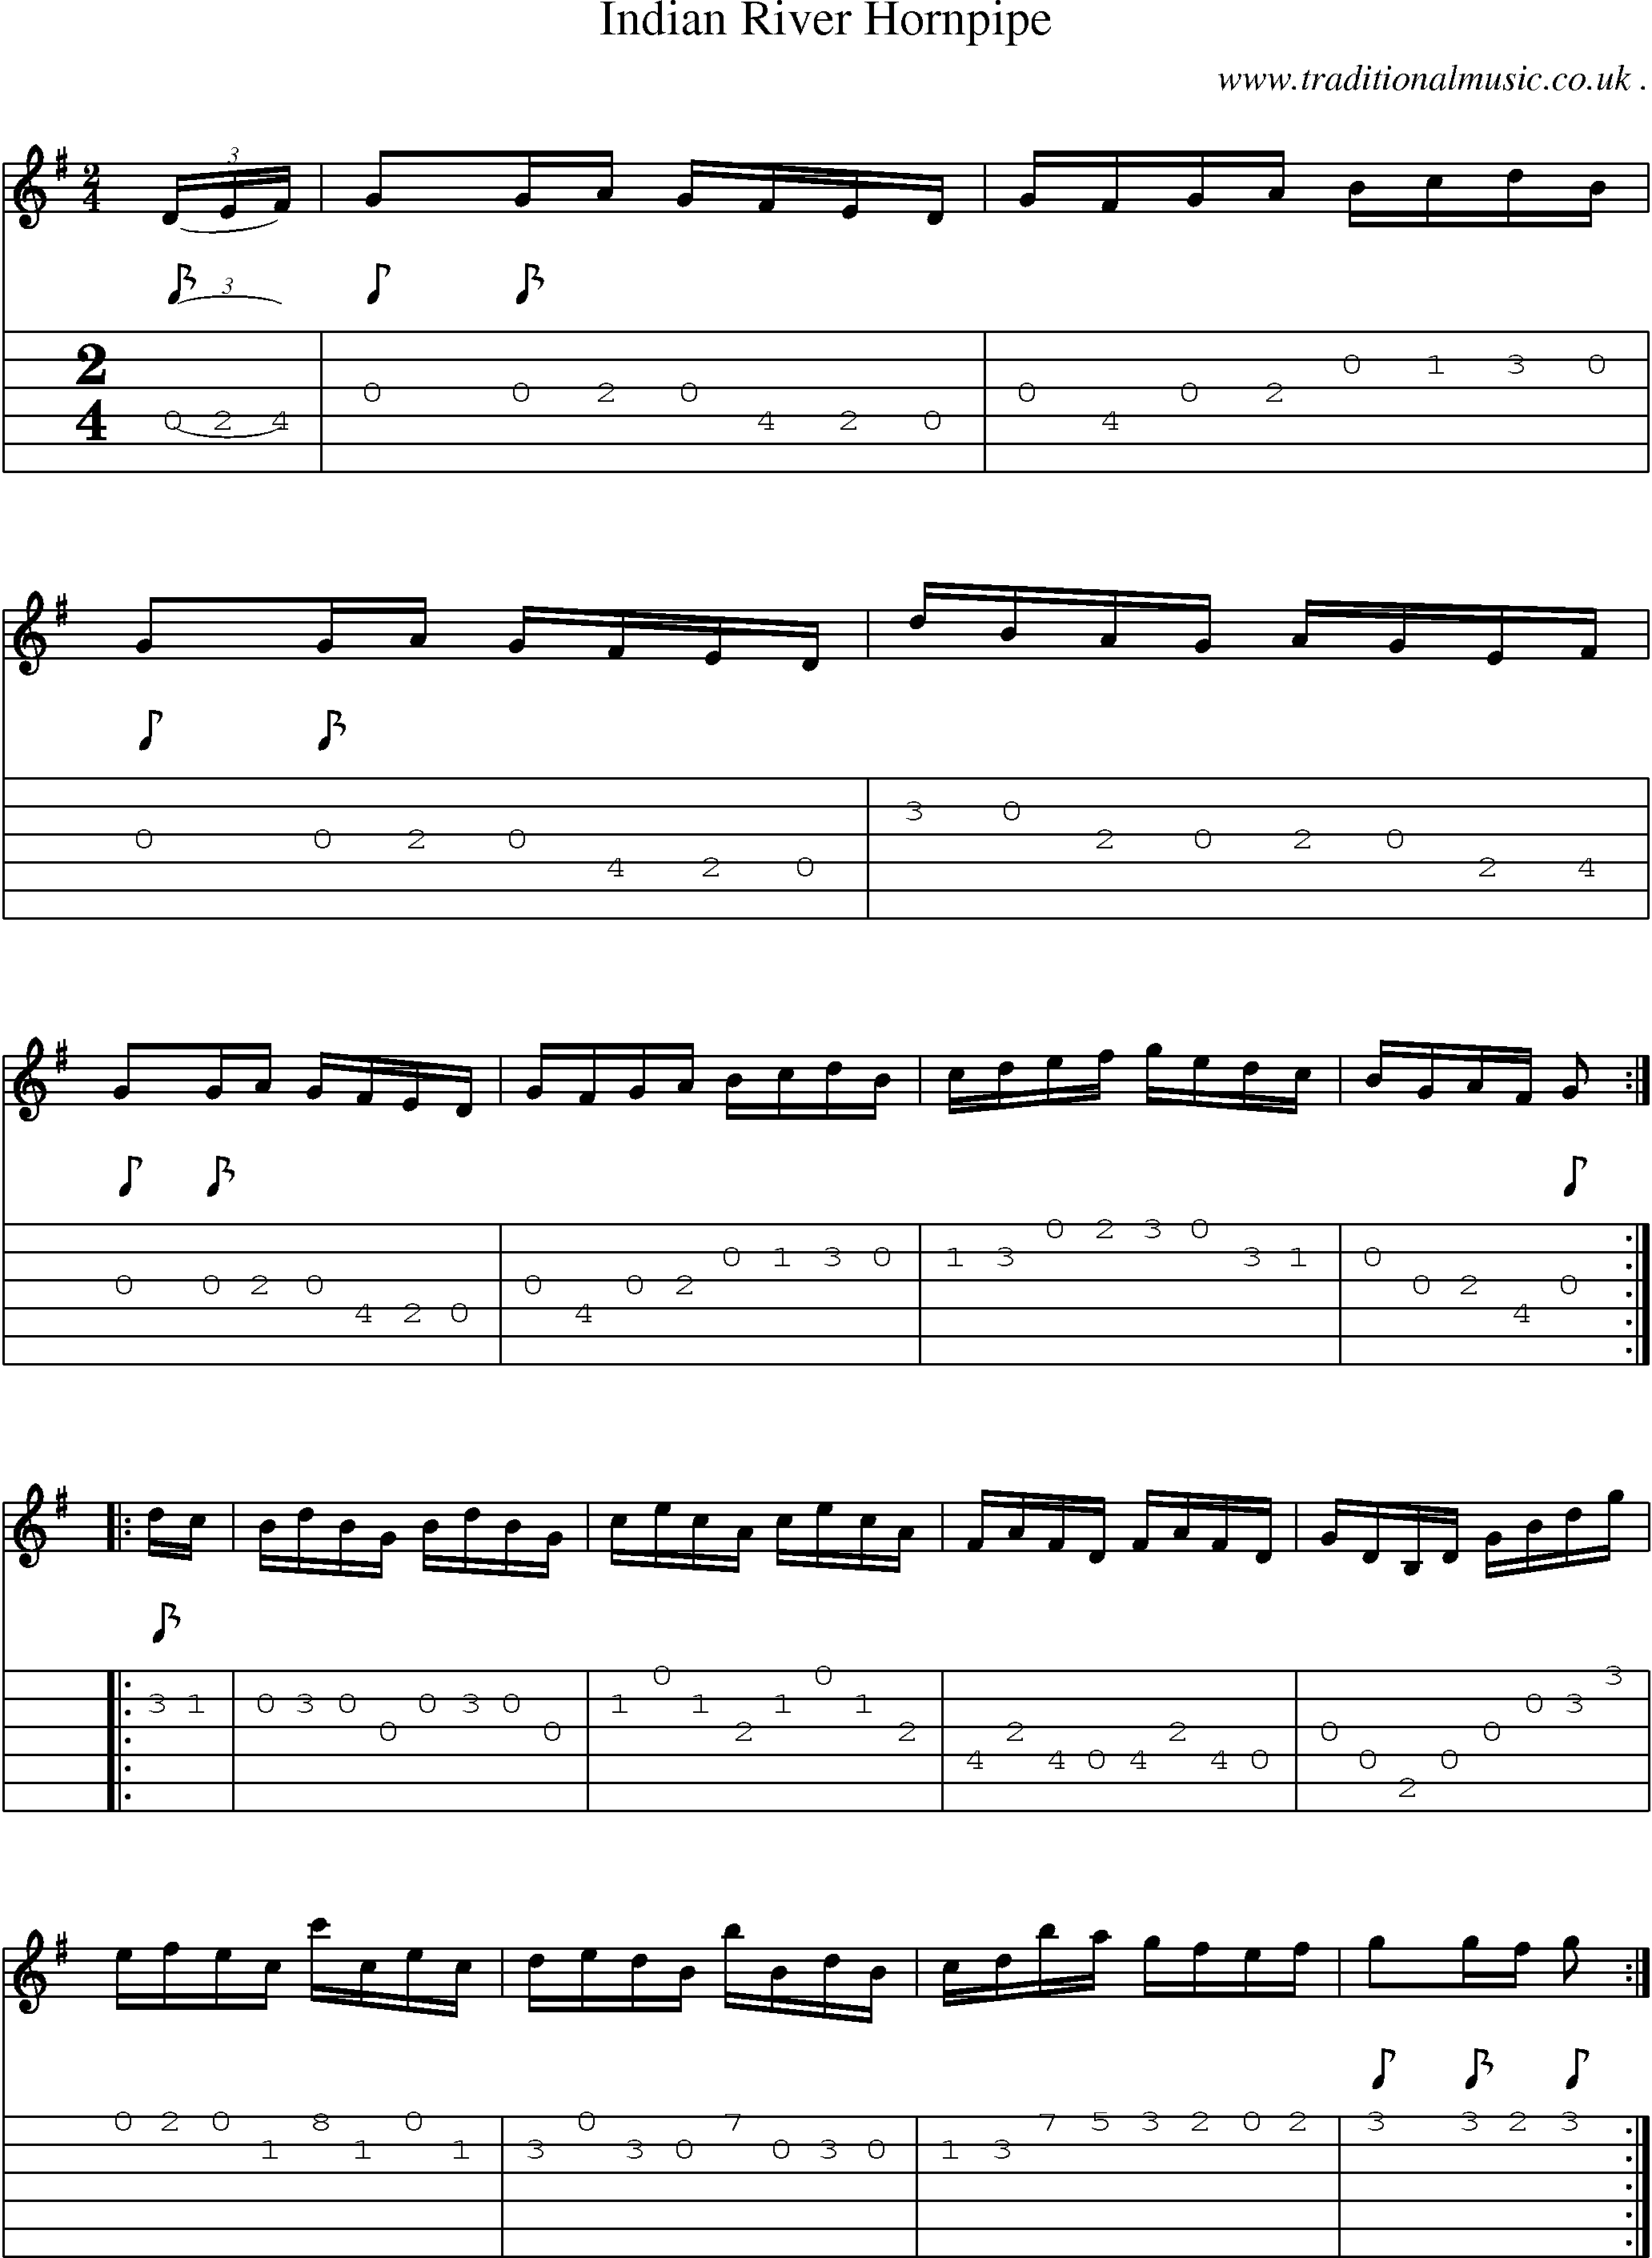 Sheet-Music and Guitar Tabs for Indian River Hornpipe